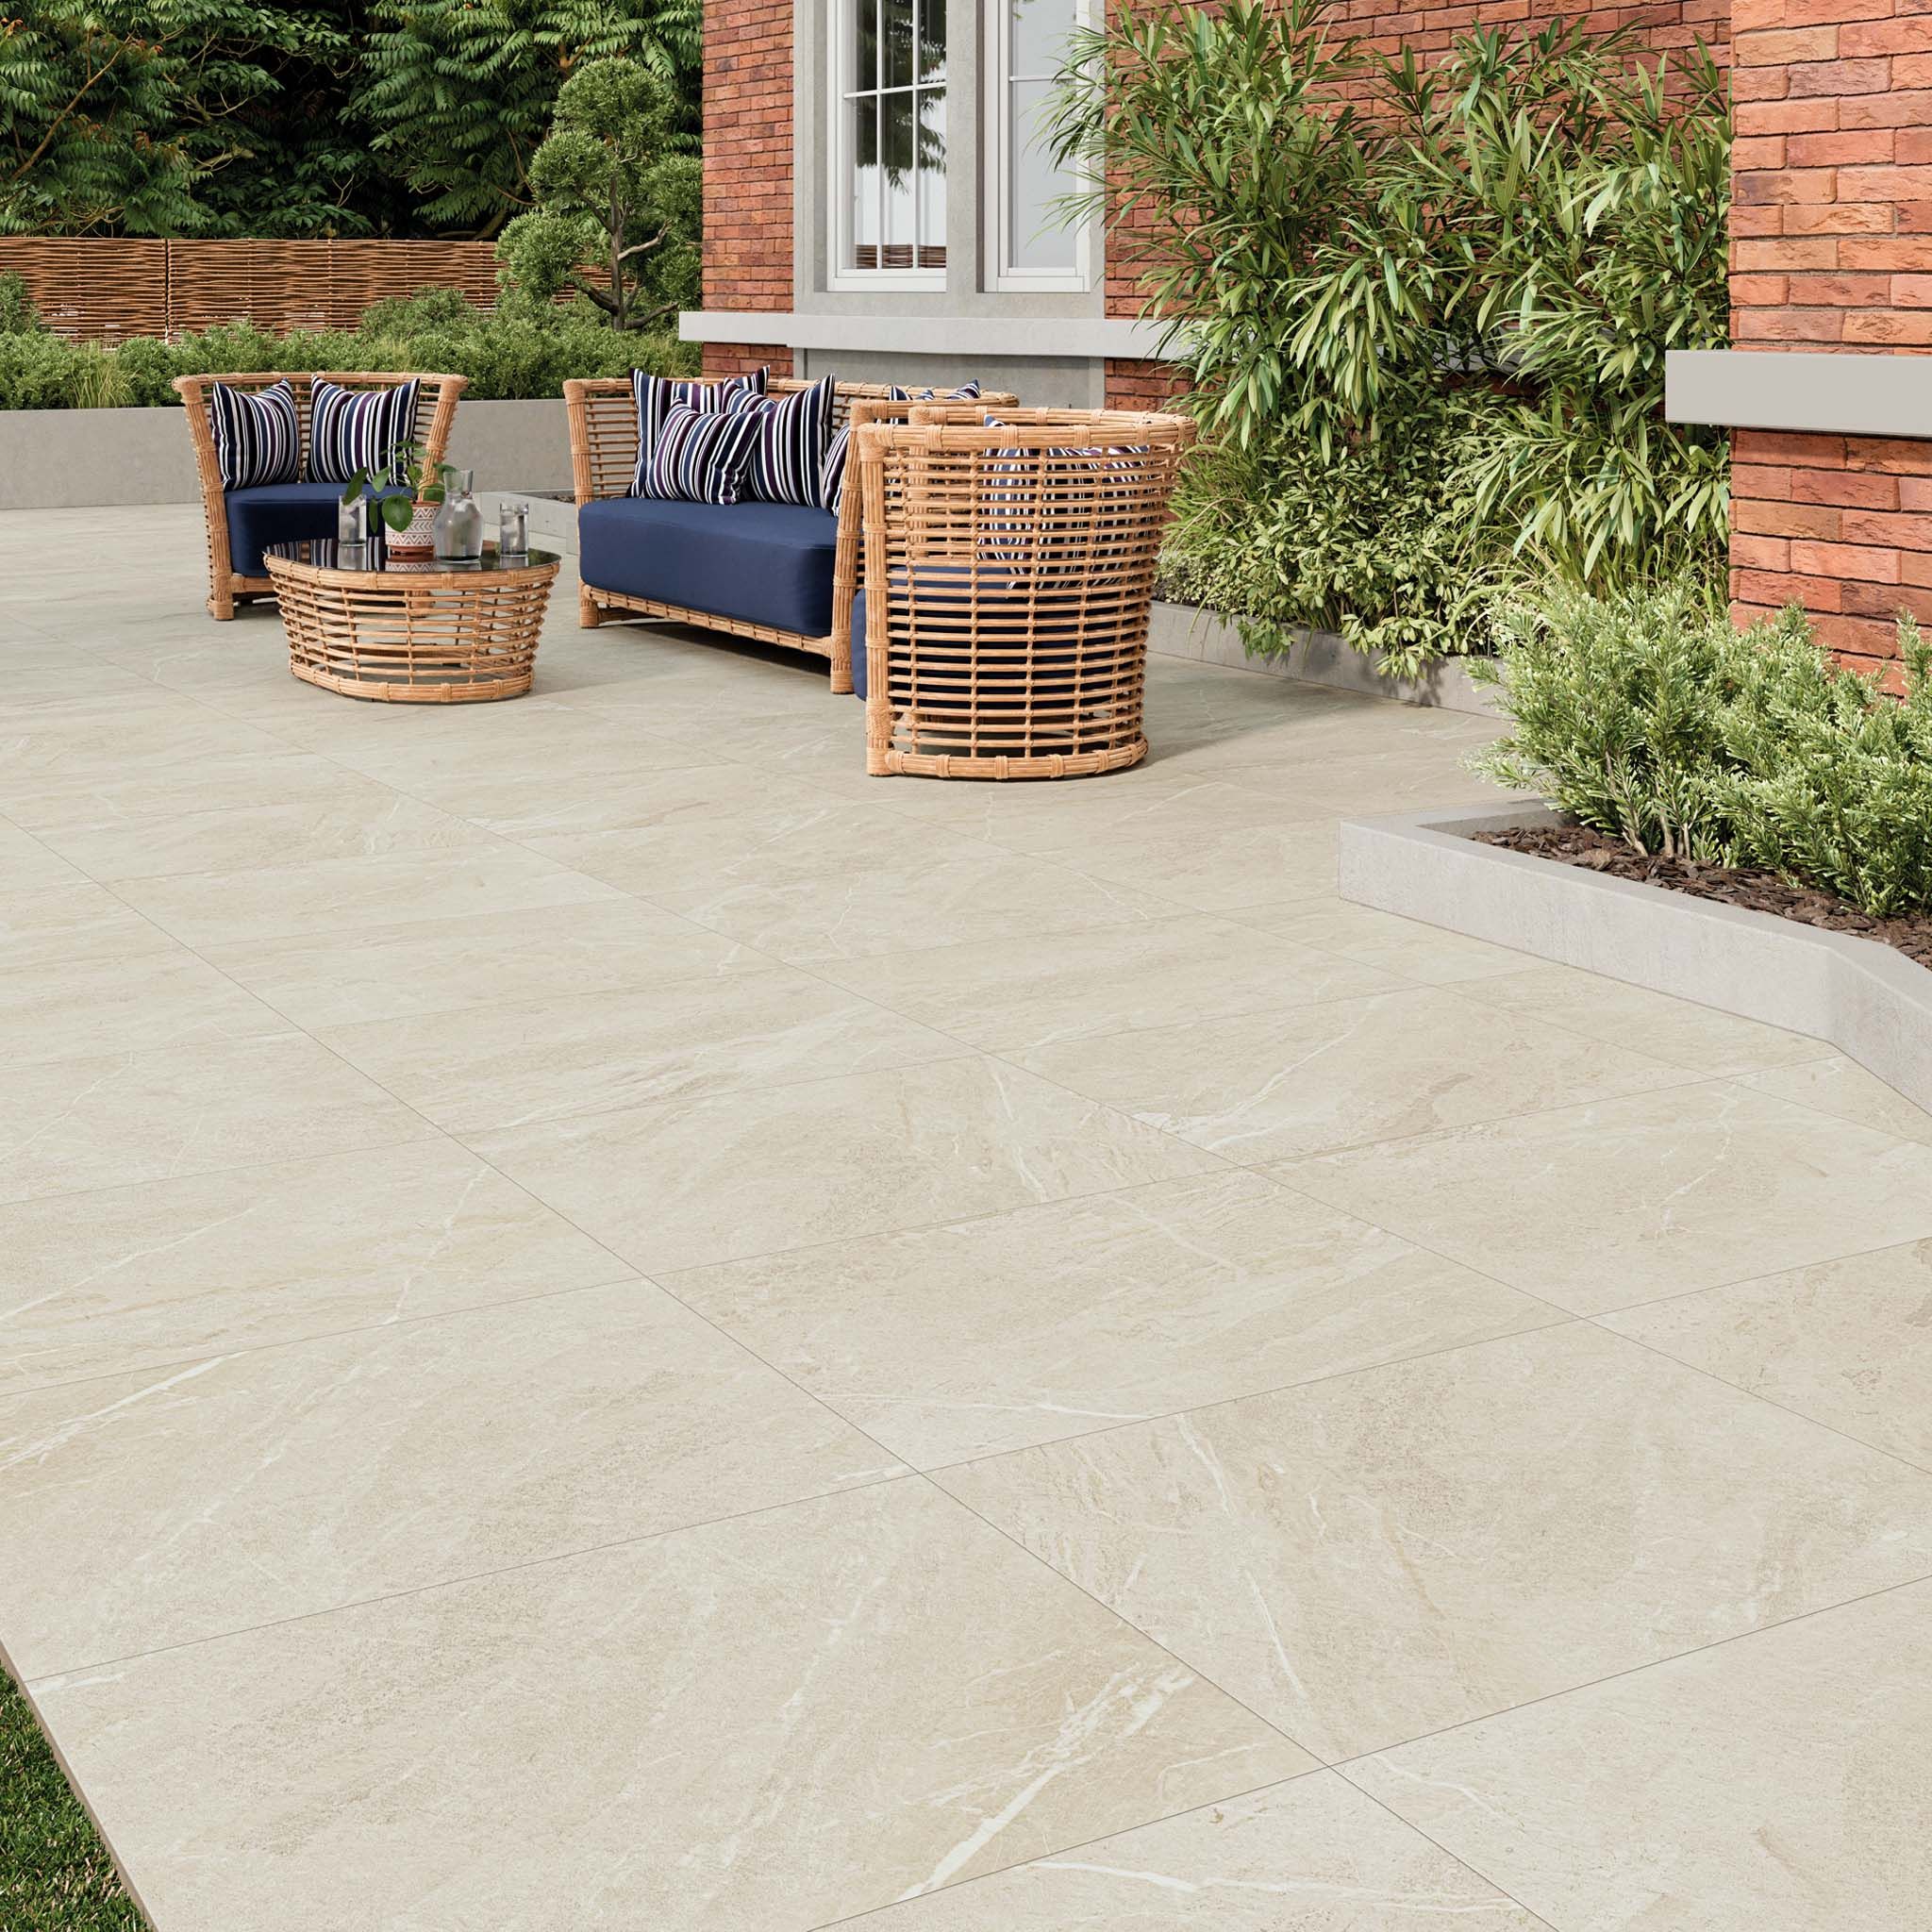 Creating a Timeless Outdoor Oasis with Patio Stones